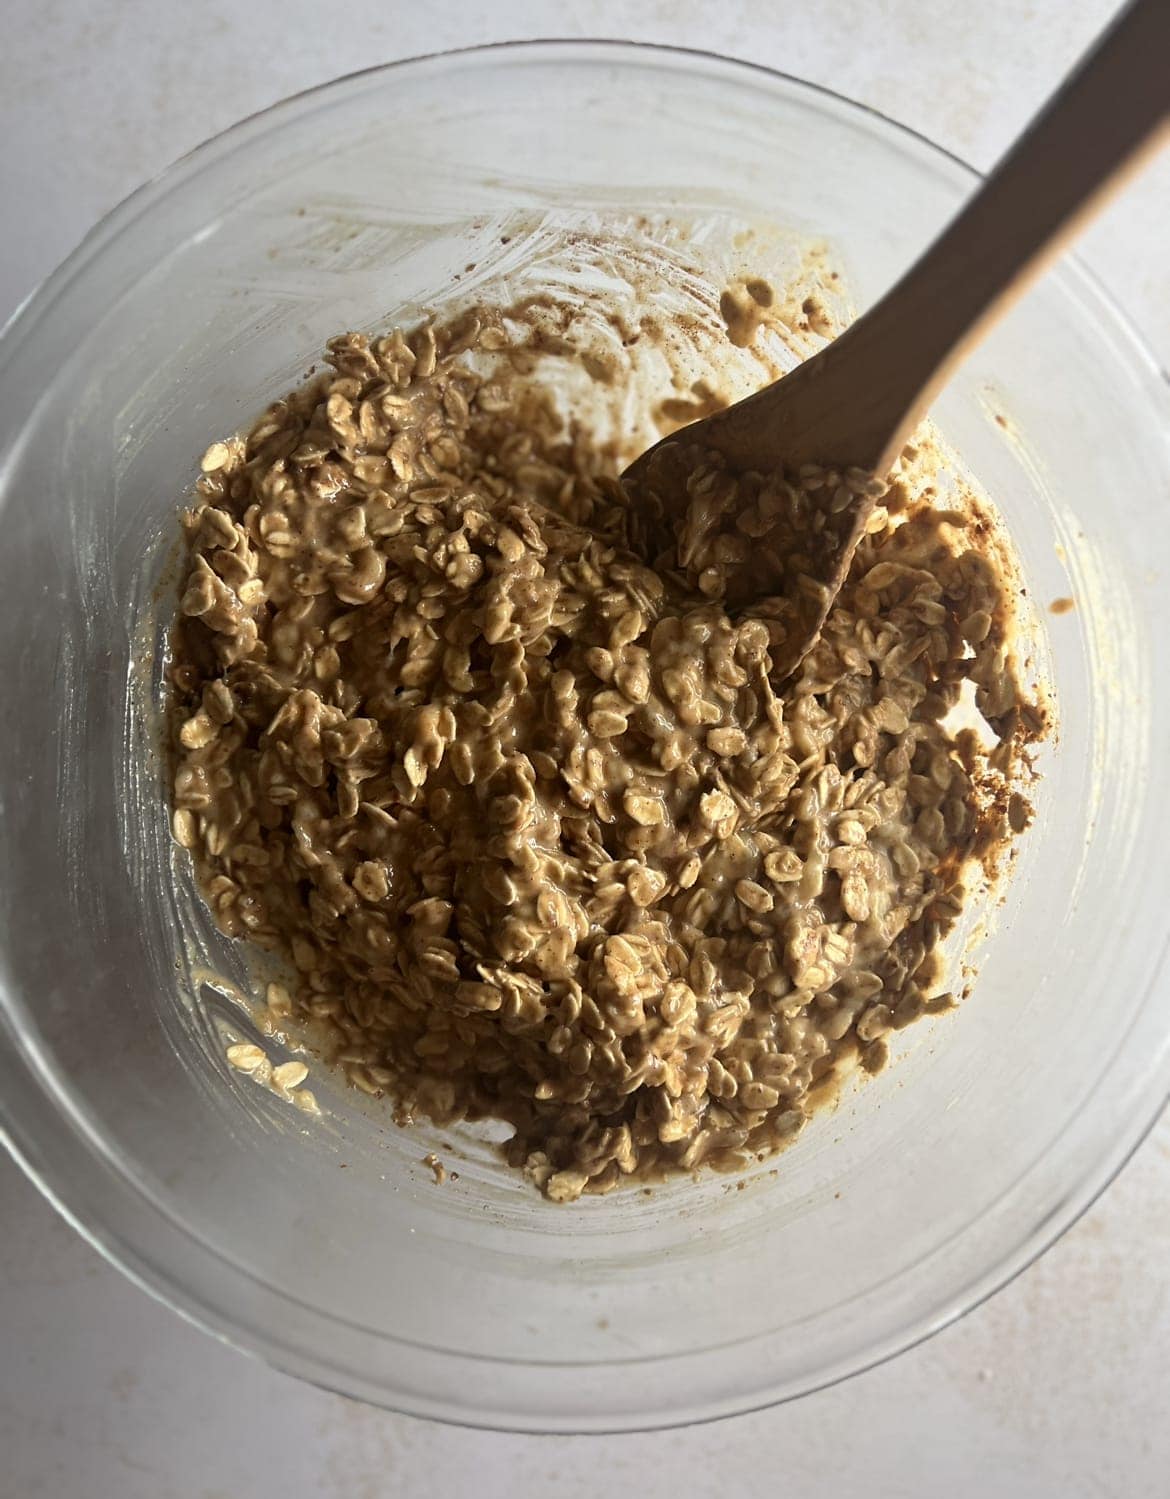 This is a photo of banana oatmeal bars batter with oats added.